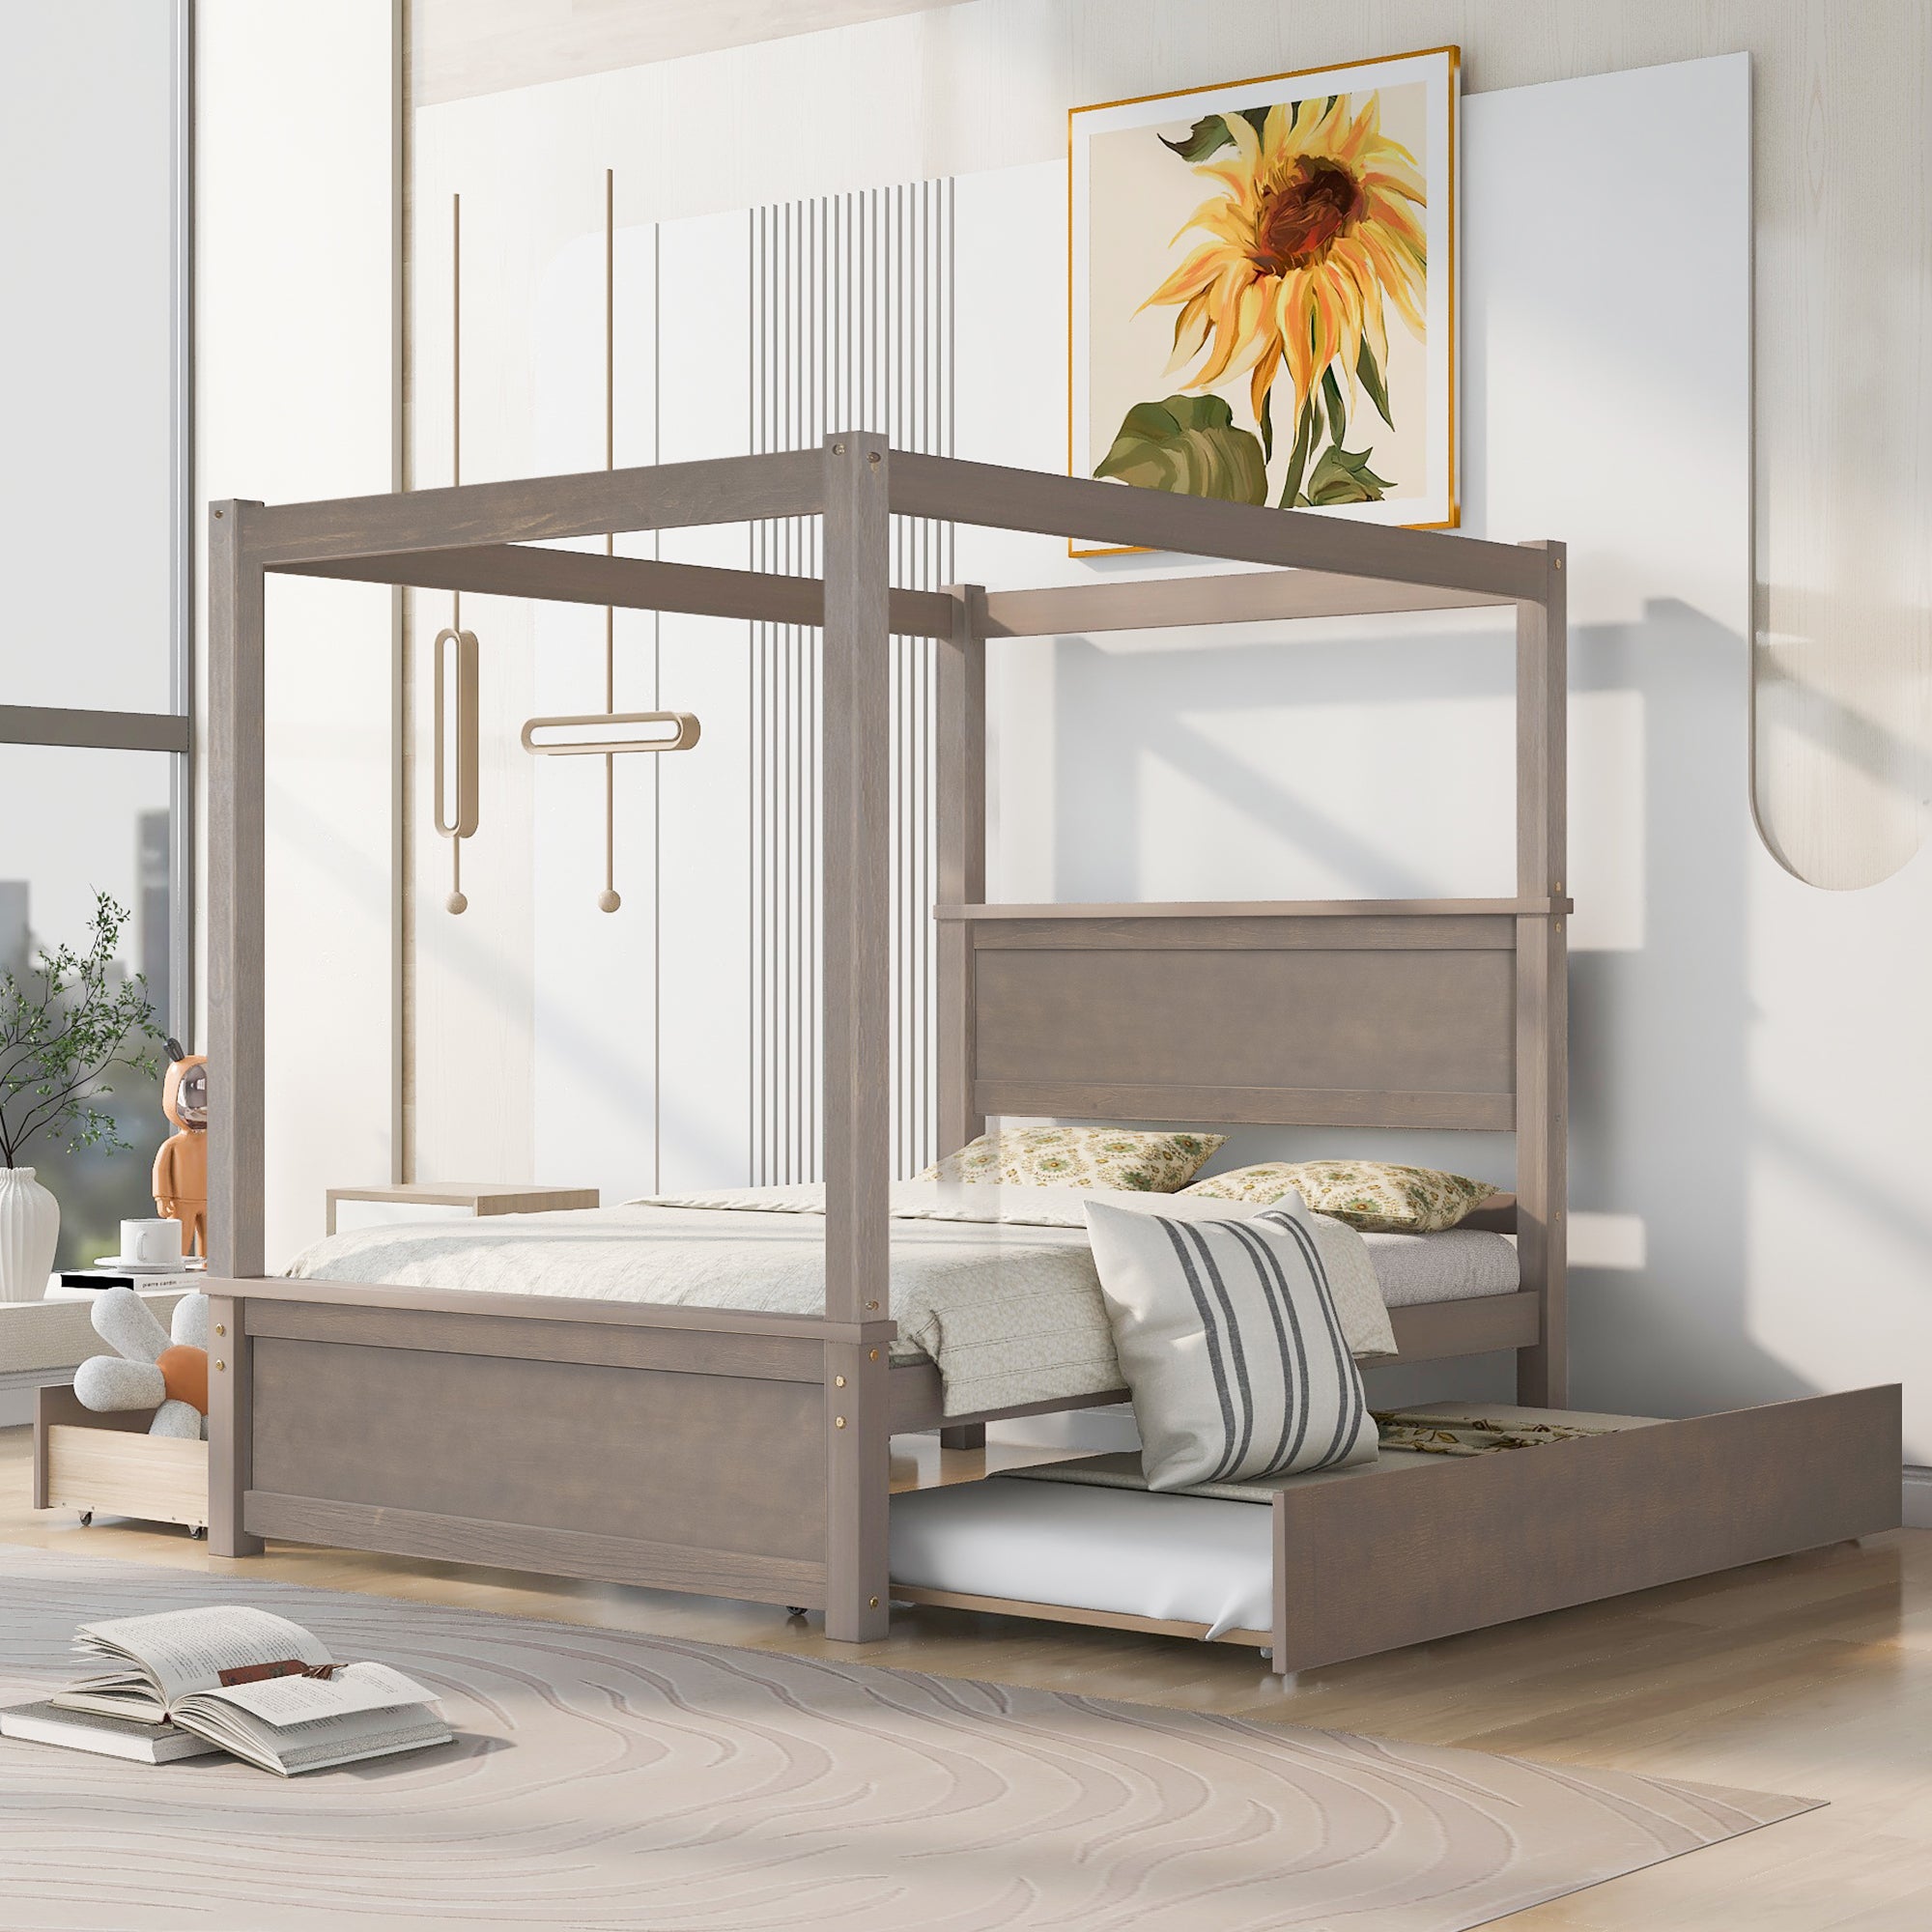 Wood-Canopy-Bed-with-Trundle-Bed-and-two-Drawers-,Full-Size-Canopy-Platform-bed--Brushed-Light-Brown-Beds-&-Bed-Frames